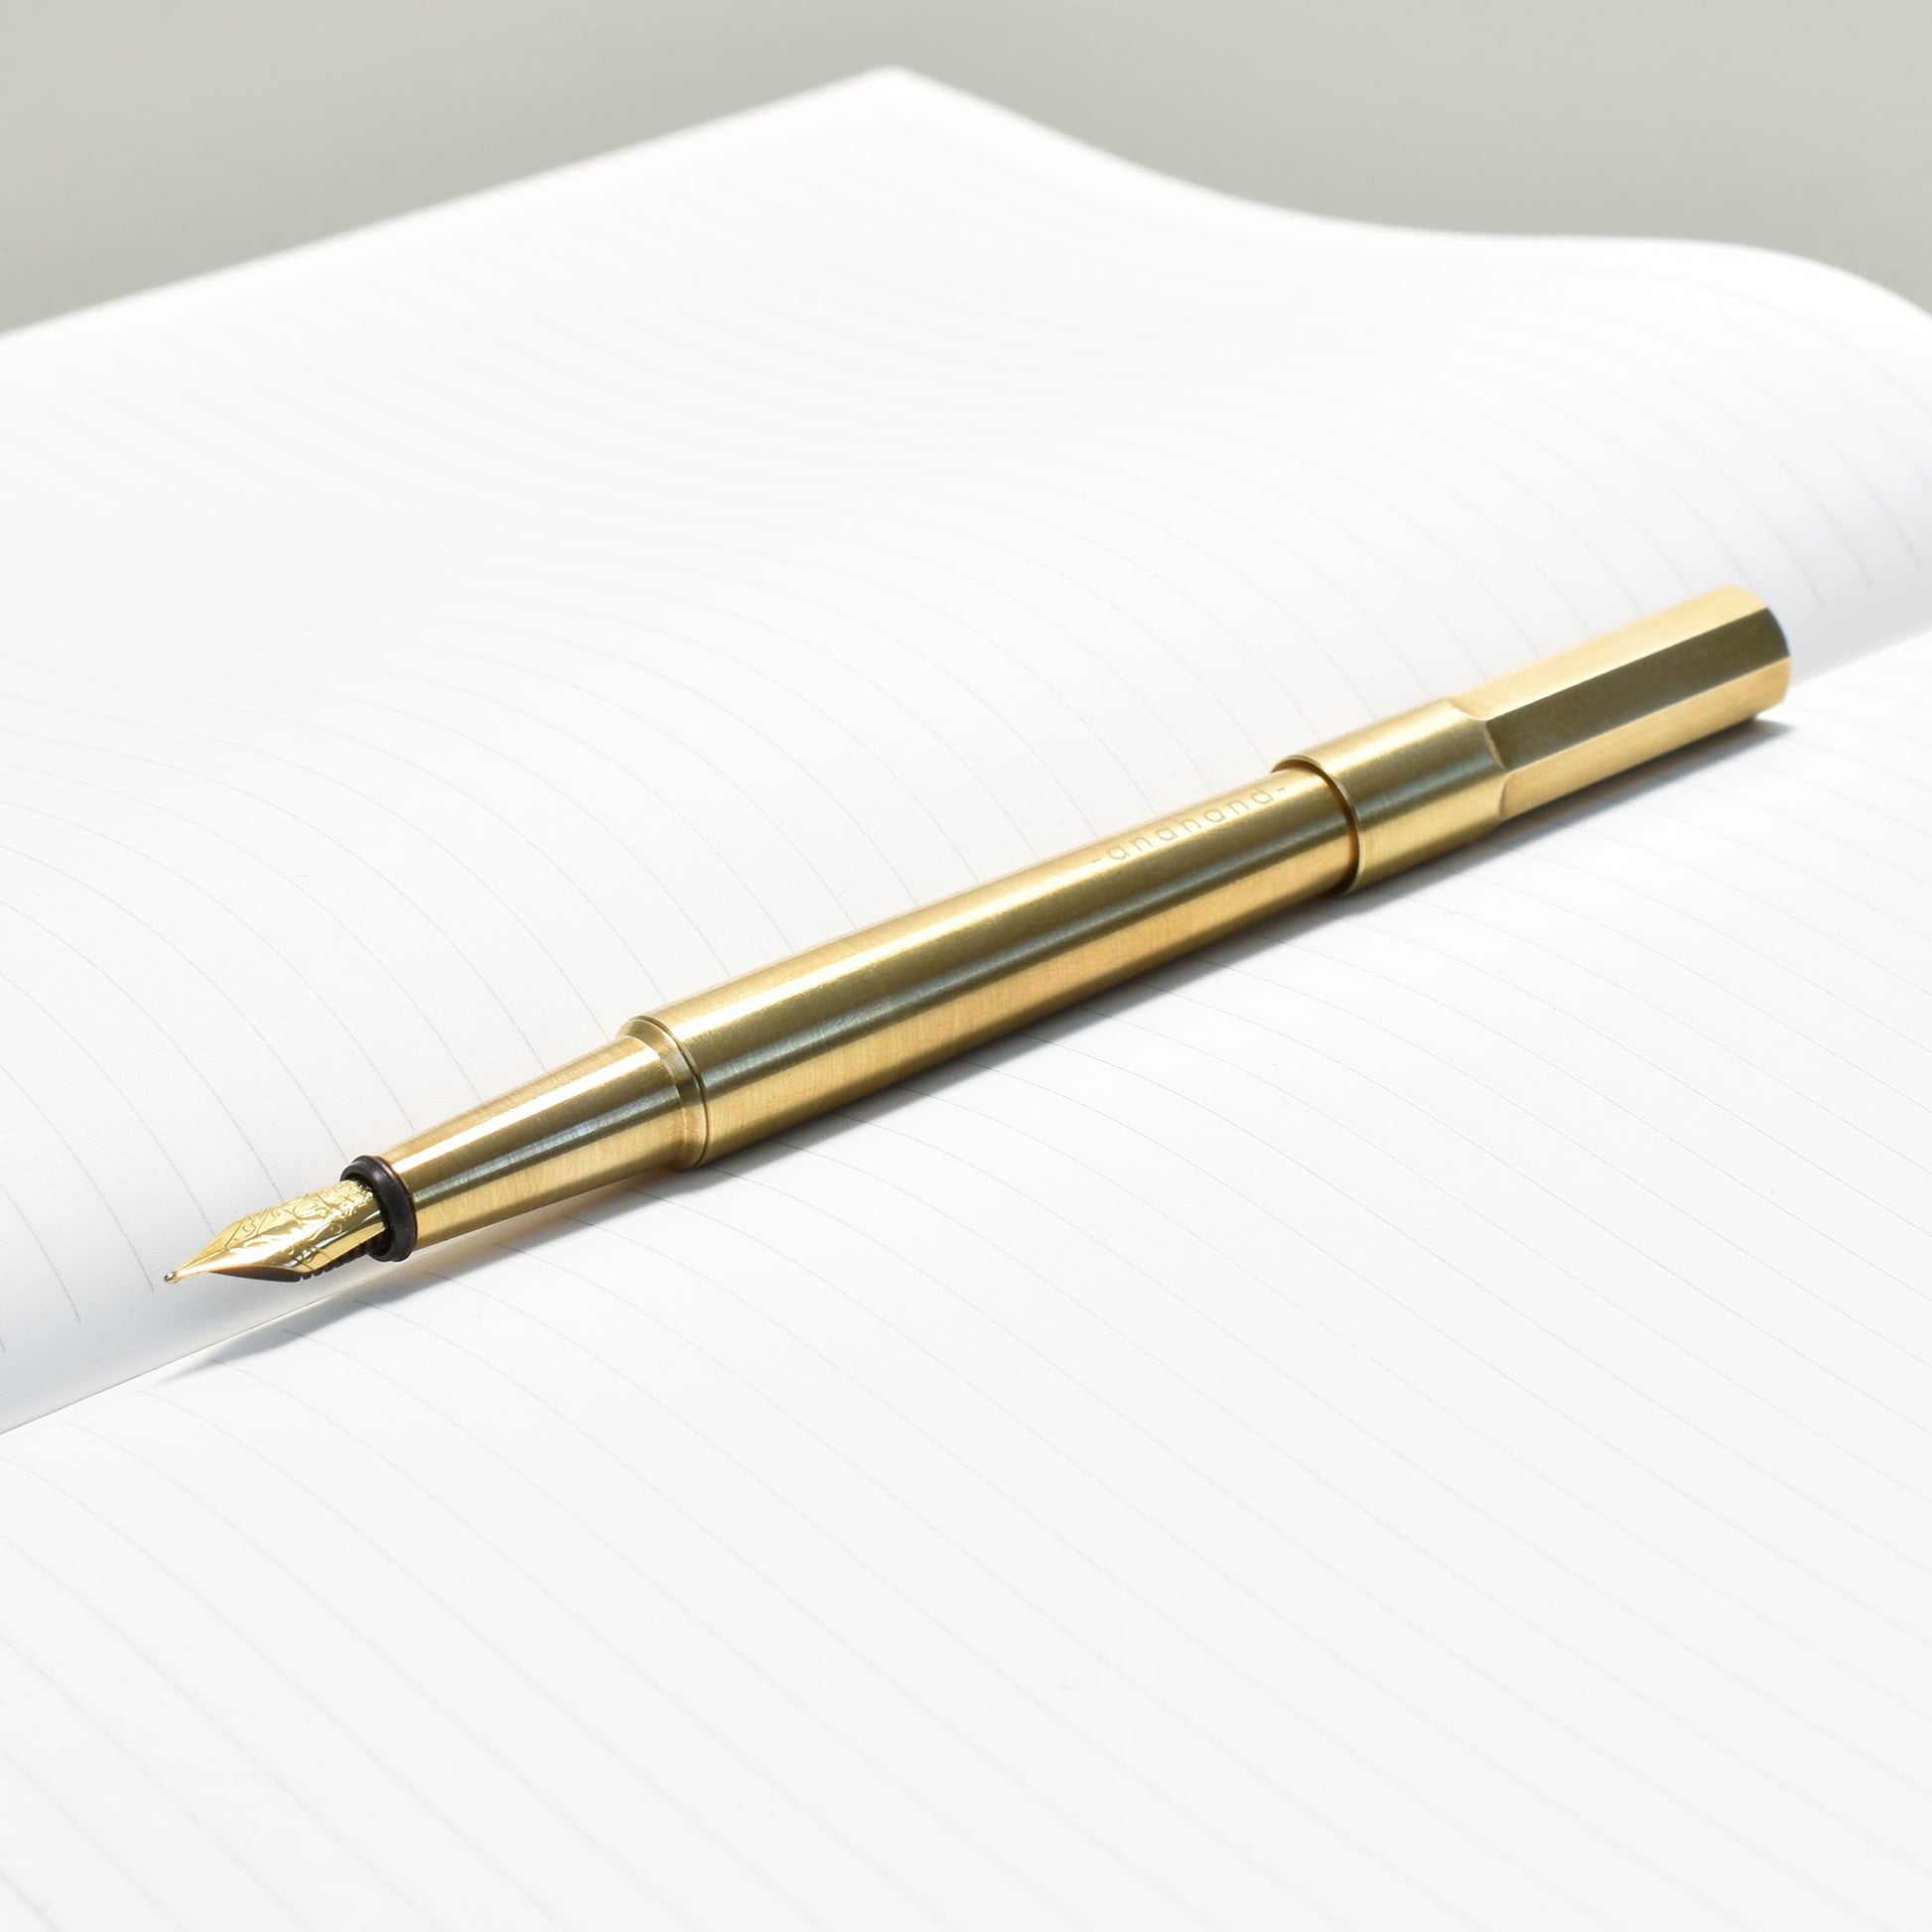 Method Fountain Pen by Andhand. Brass pen with gold plated nib. Ideal fountain pen for writing.